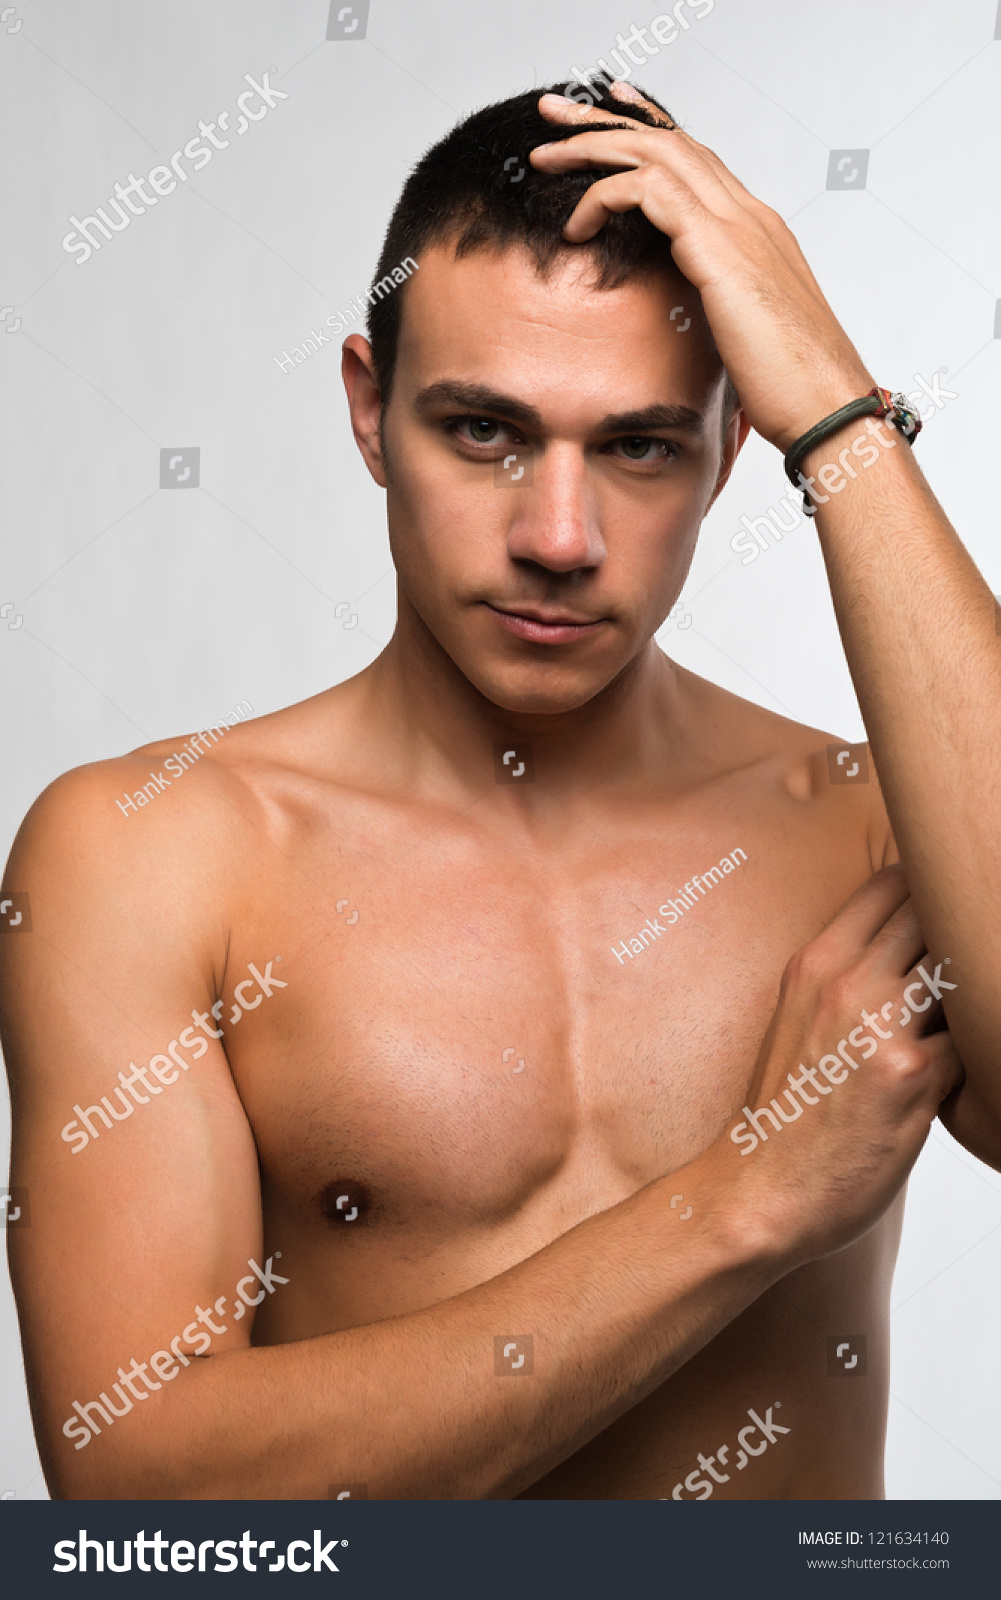 Profile Of A Handsome Bare-Chested Man Stock Photo 